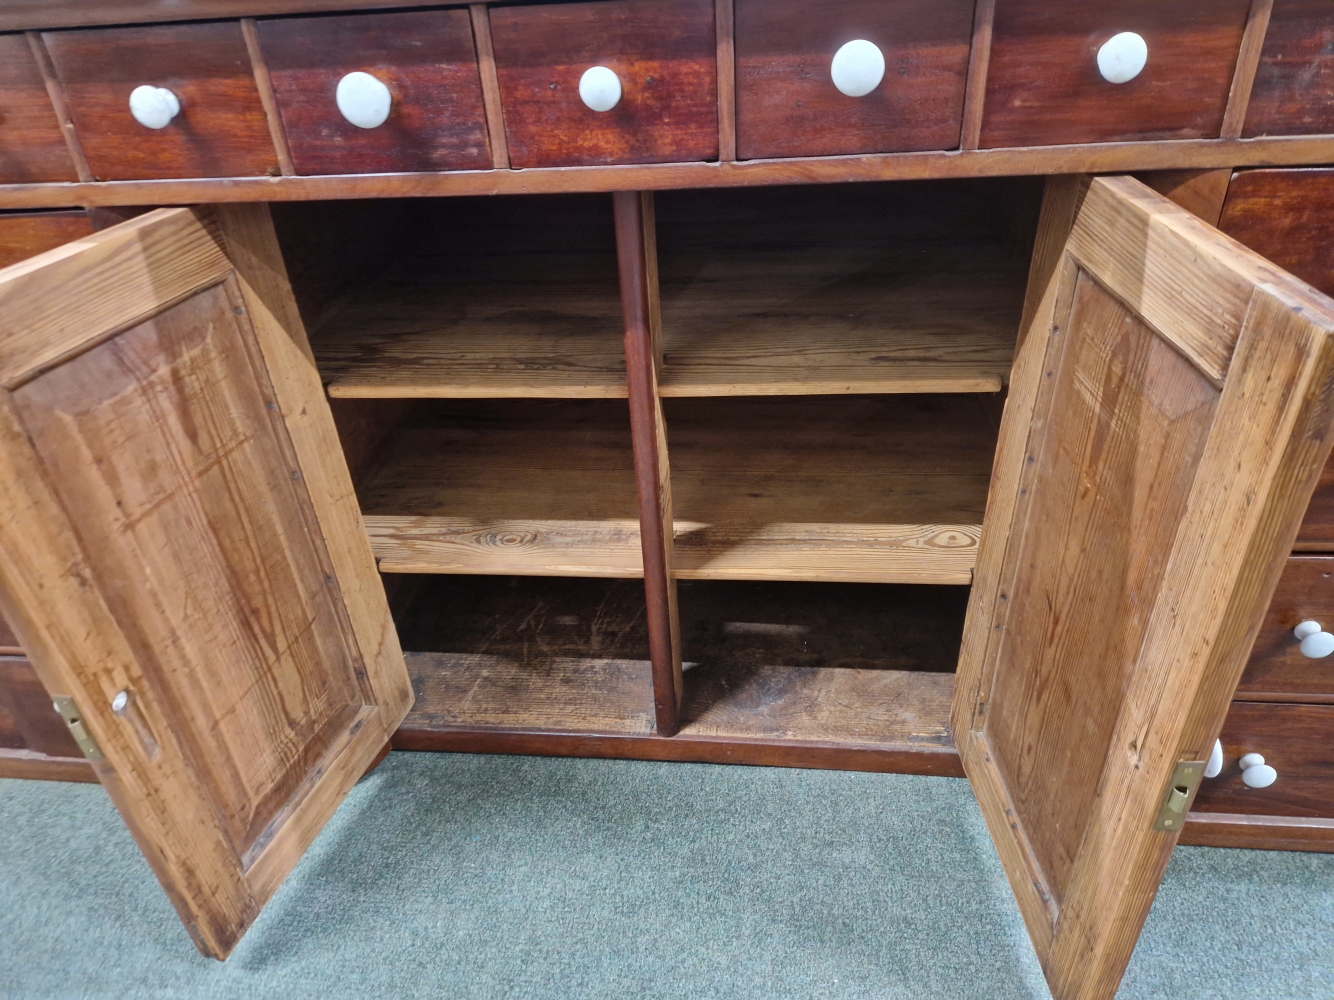 A MAHOGANY SHOP COUNTER FITTED WITH MULTIPLE DRAWERS AND CUPBOARDS EACH WITH WHITE CERAMIC KNOB - Image 22 of 23